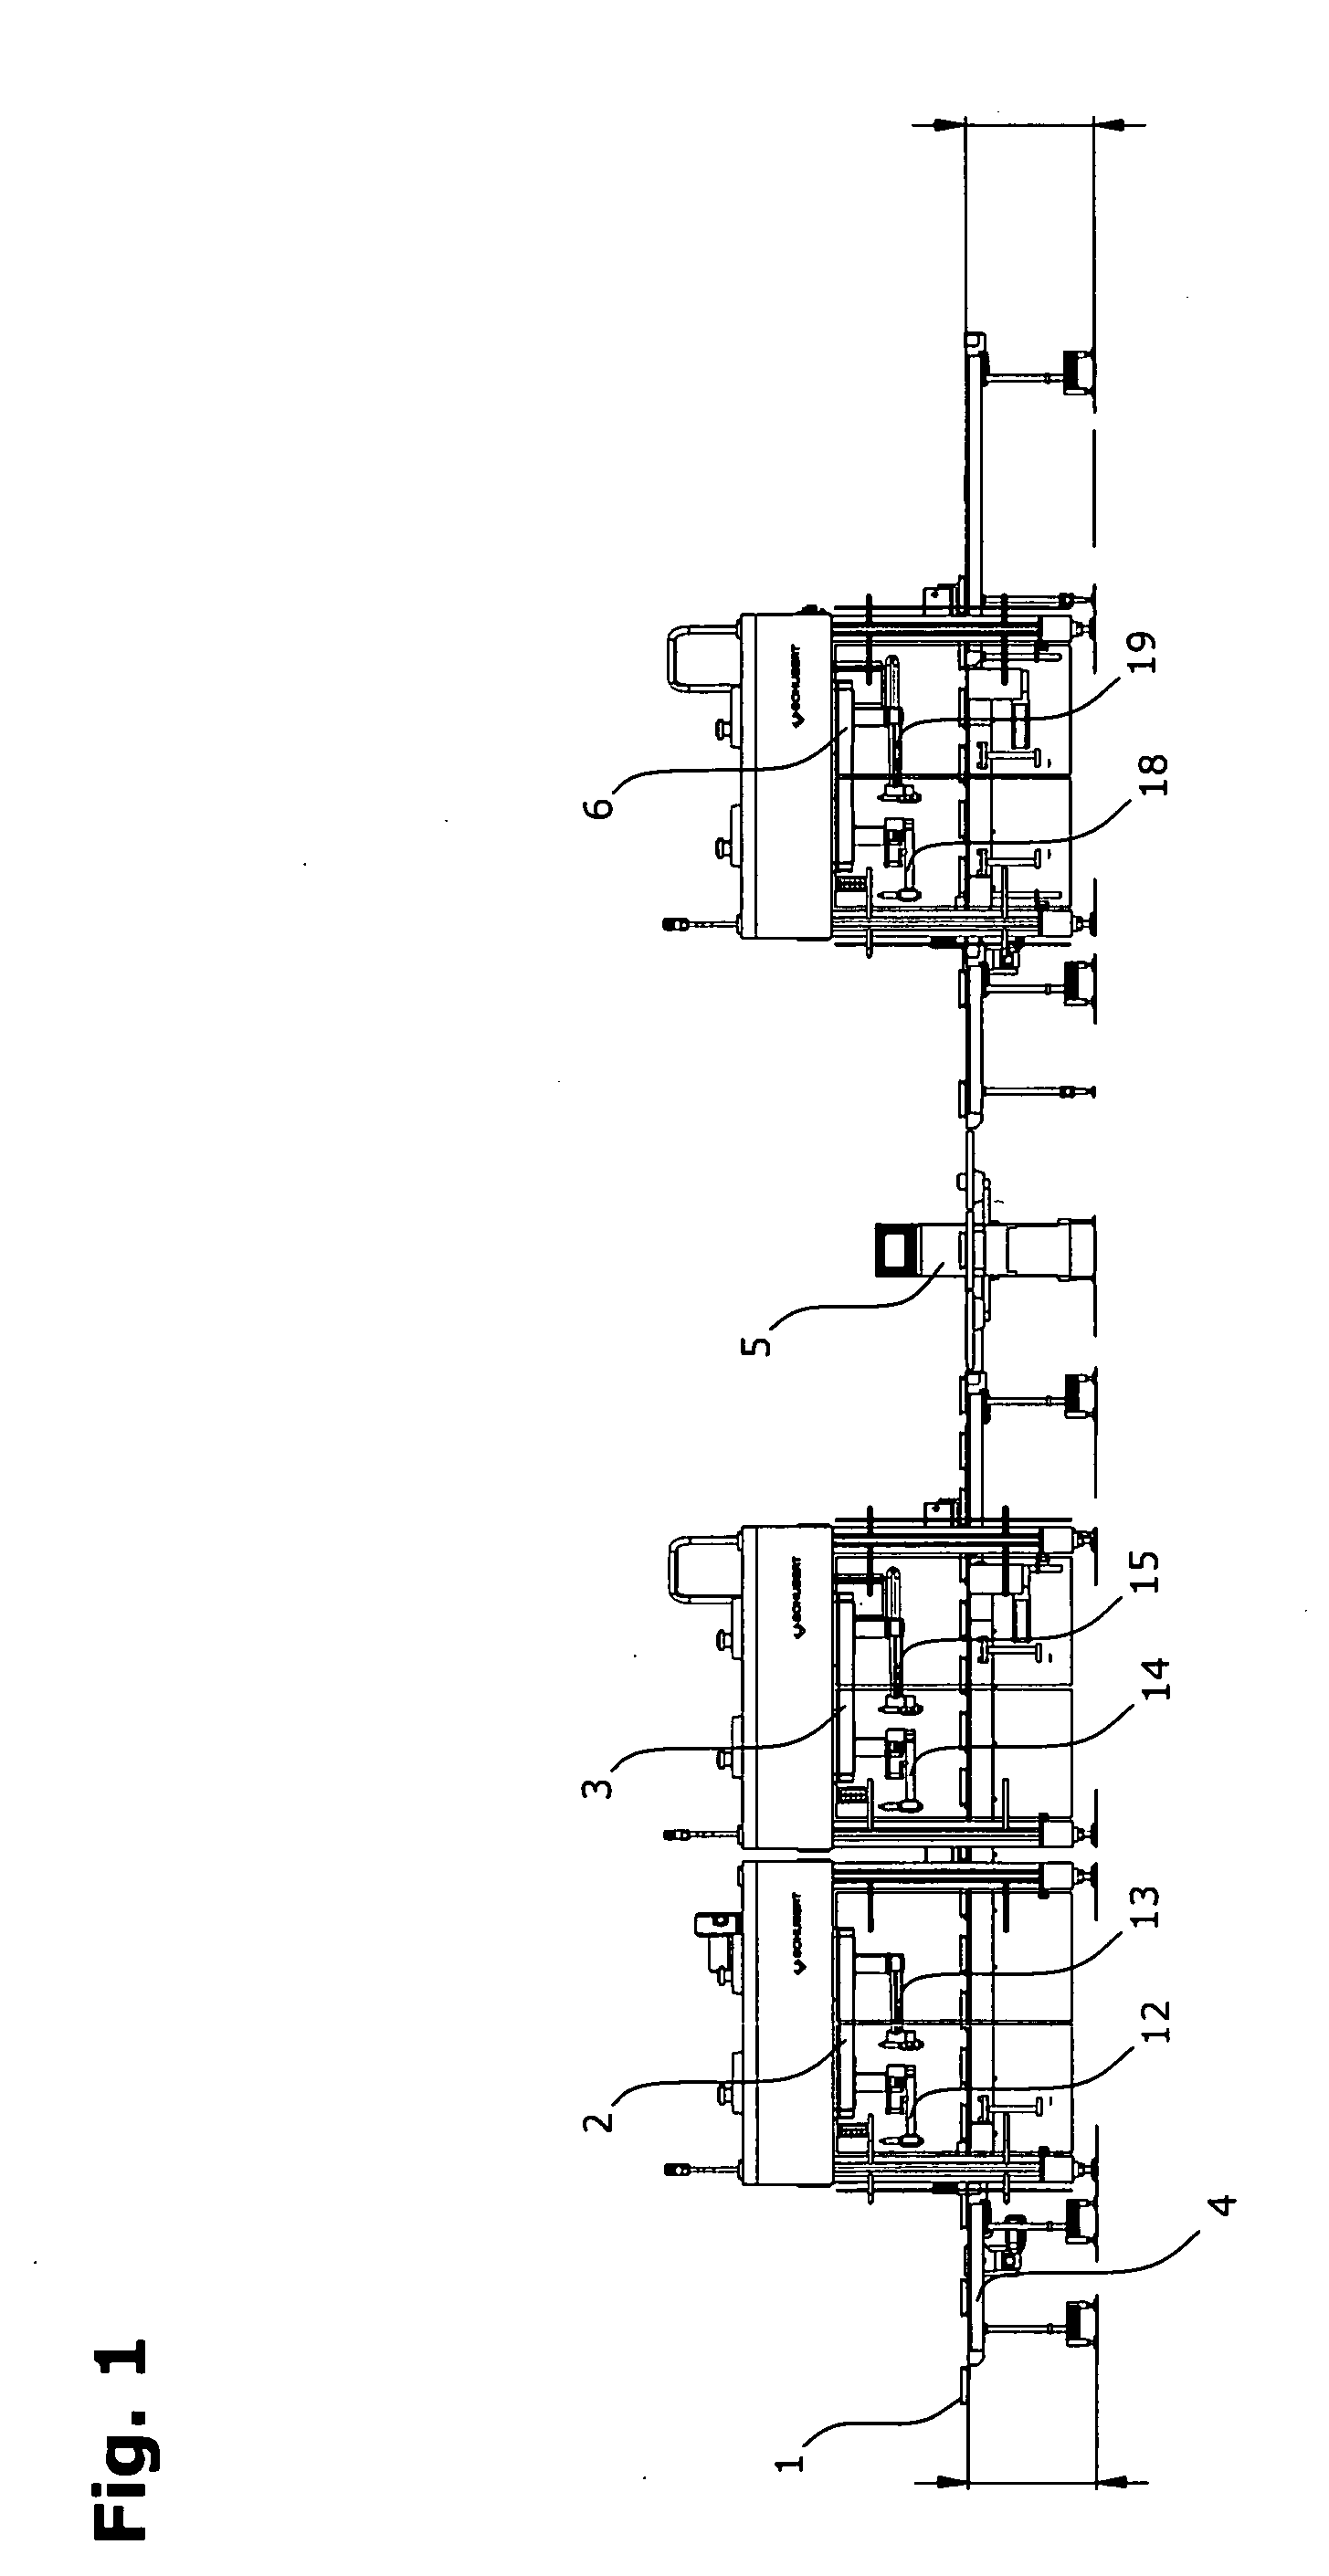 Method and device for consolidating items into a single unit of a pre-defined total weight